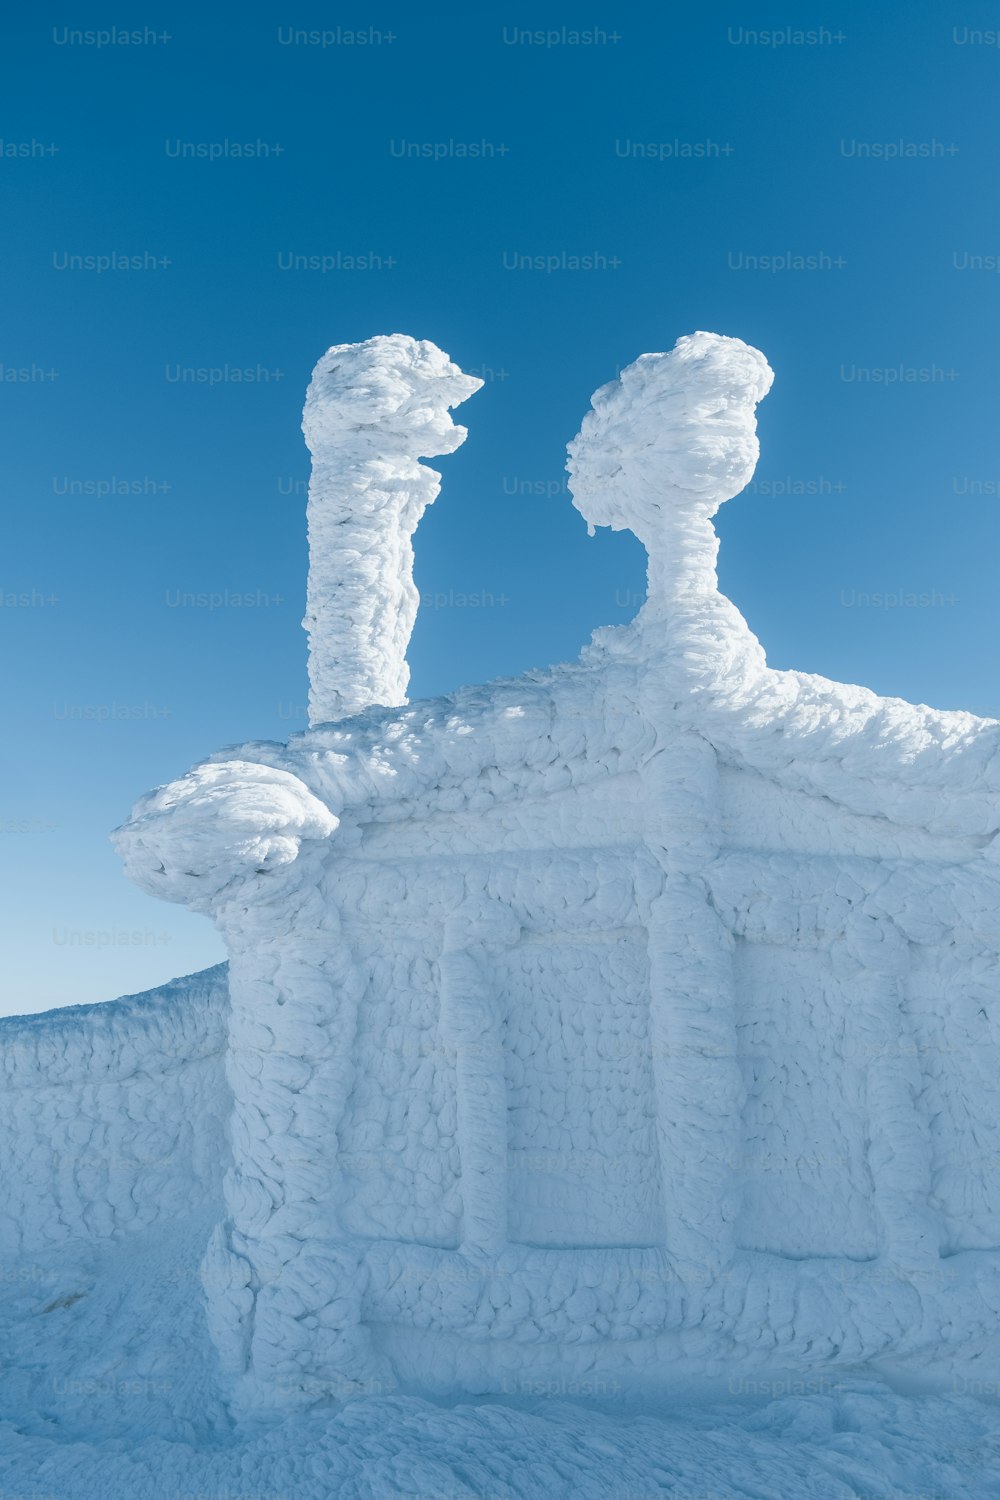 a building made out of snow with a blue sky in the background